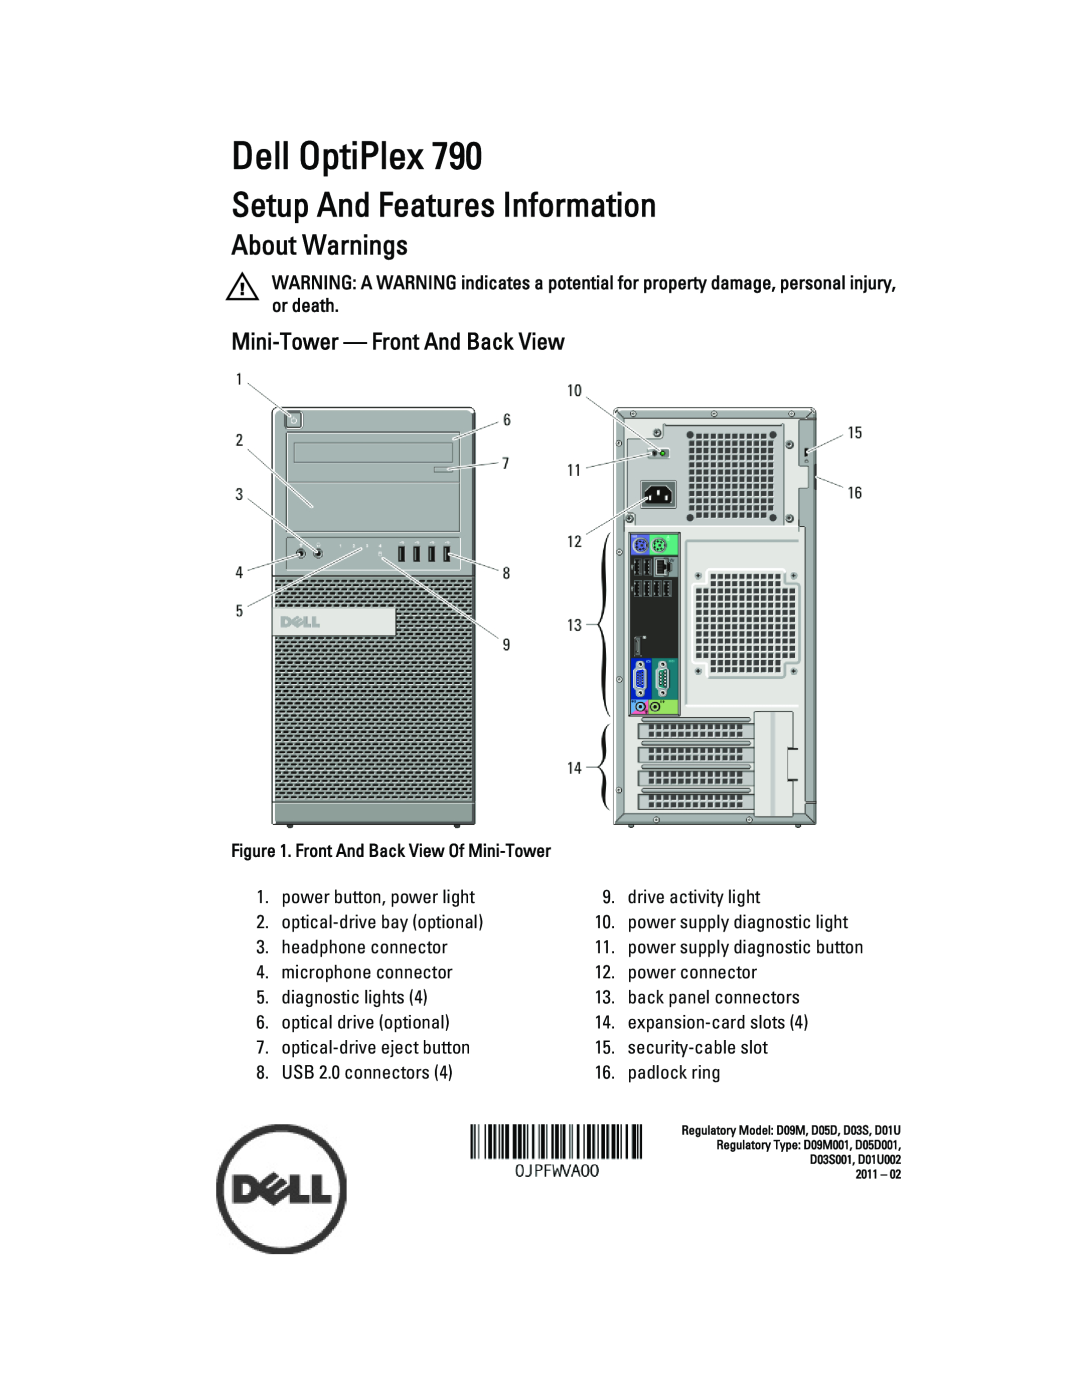 Dell 790.000 manual Mini-Tower - Front And Back View, Dell OptiPlex, Setup And Features Information, About Warnings 